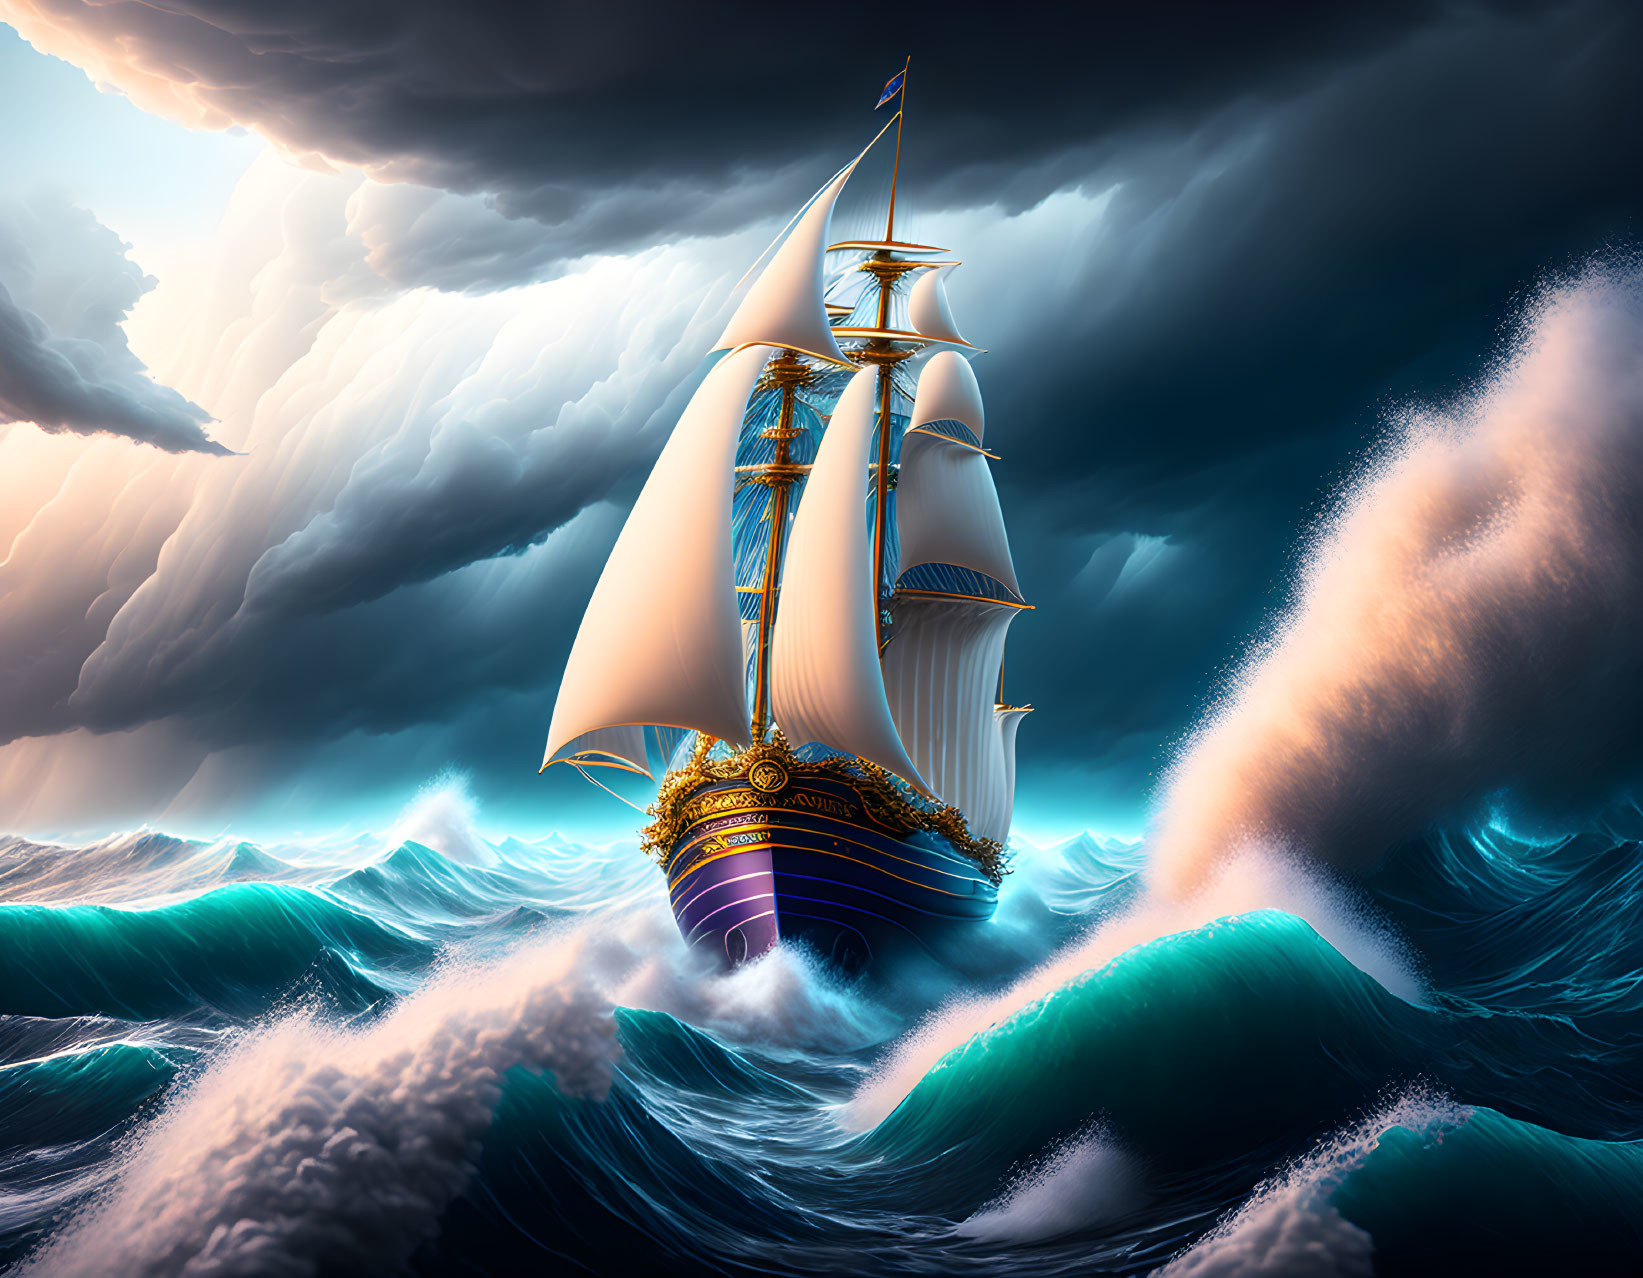 Sailing in the Storm